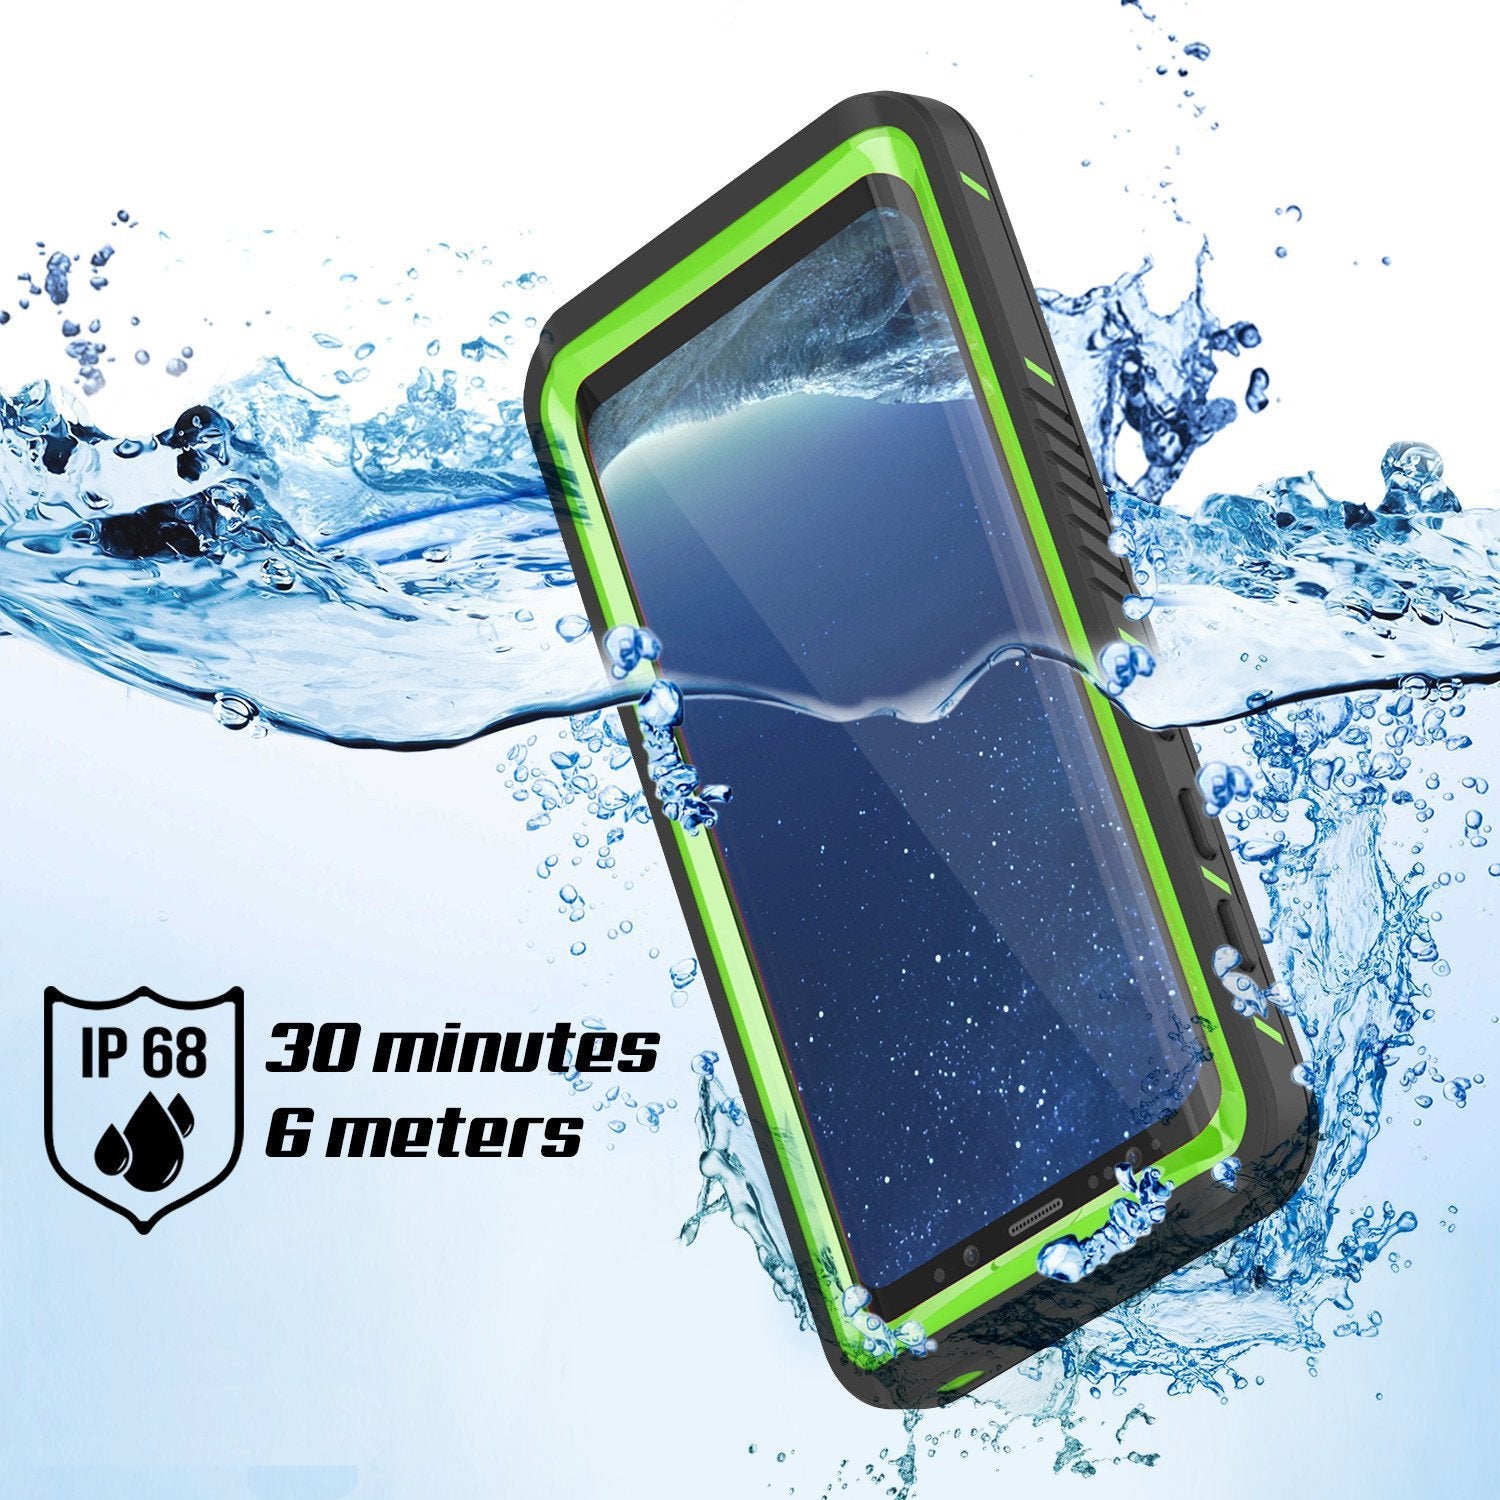 Galaxy S8 PLUS Waterproof Case, Punkcase [Extreme Series] Slim Fit, Armor Cover W/ Built In Screen Protector for Samsung Galaxy S8+ [Green]